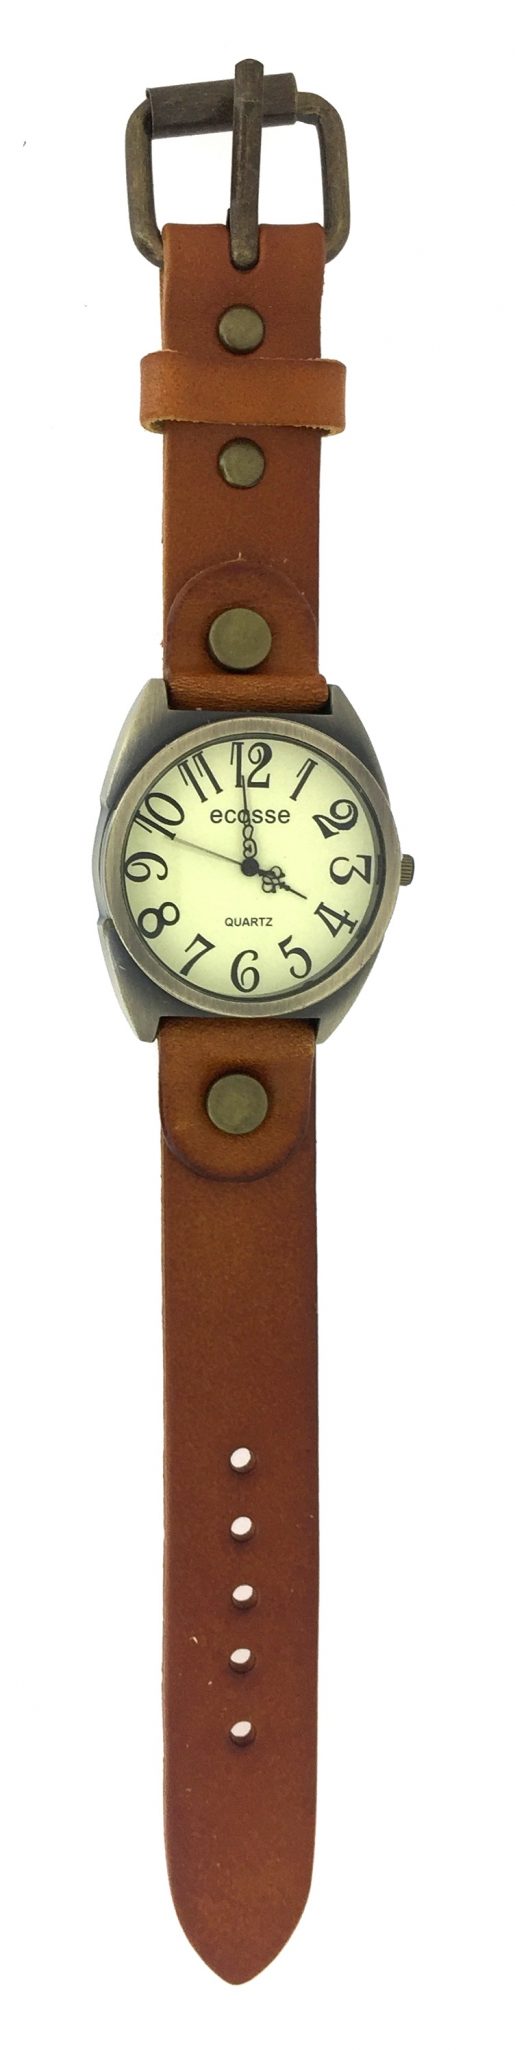 Watch with Large Numbers